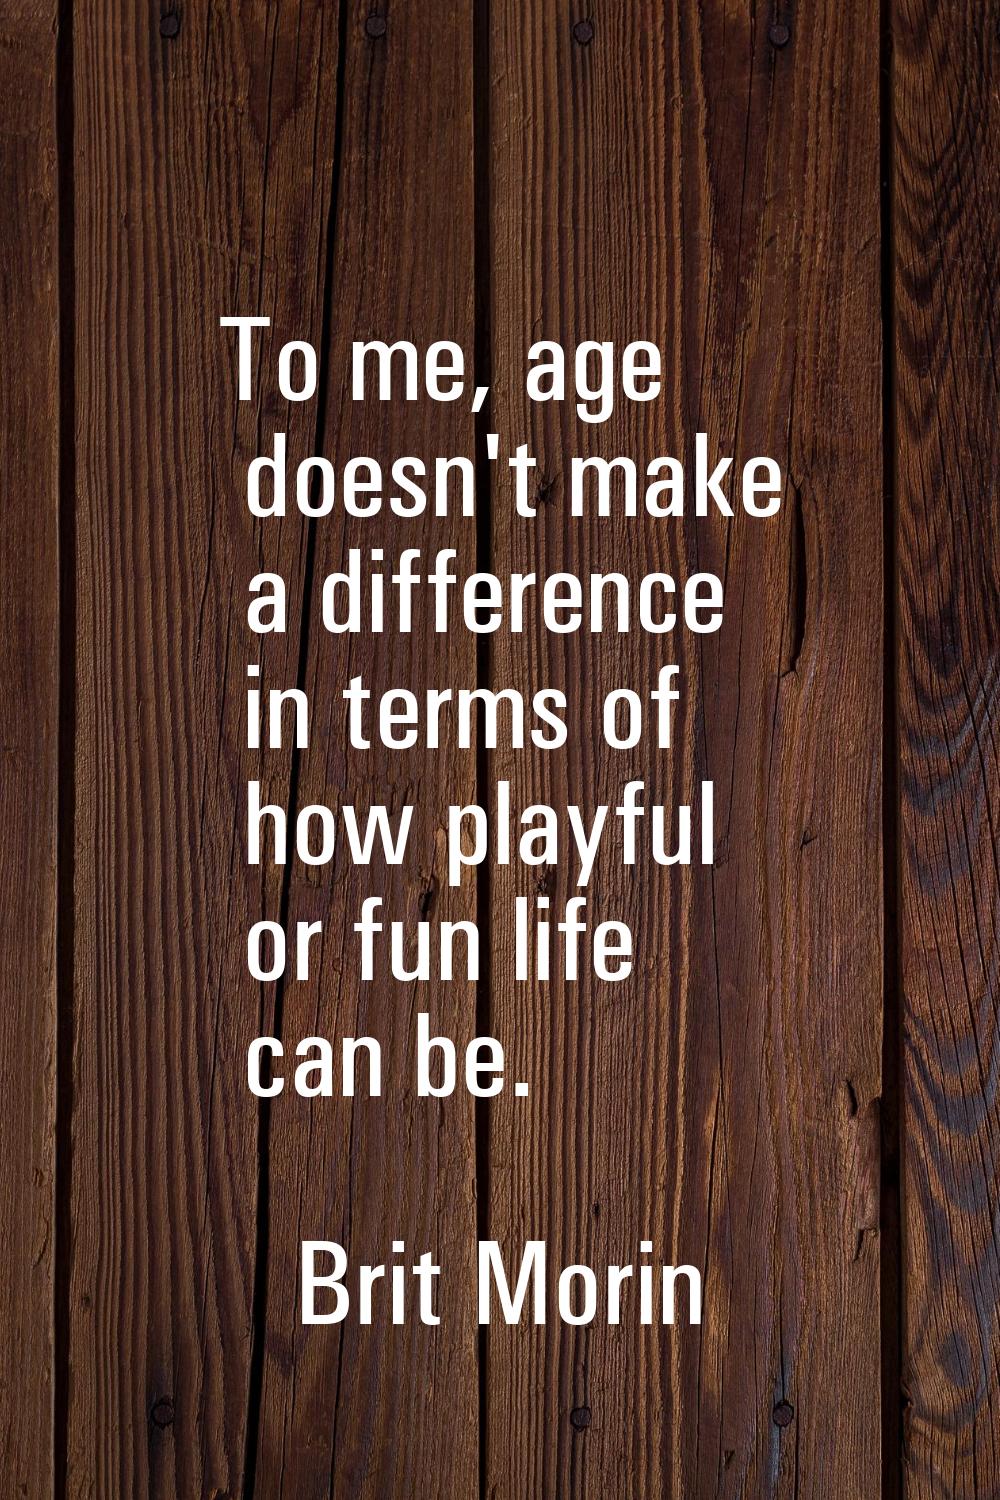 To me, age doesn't make a difference in terms of how playful or fun life can be.